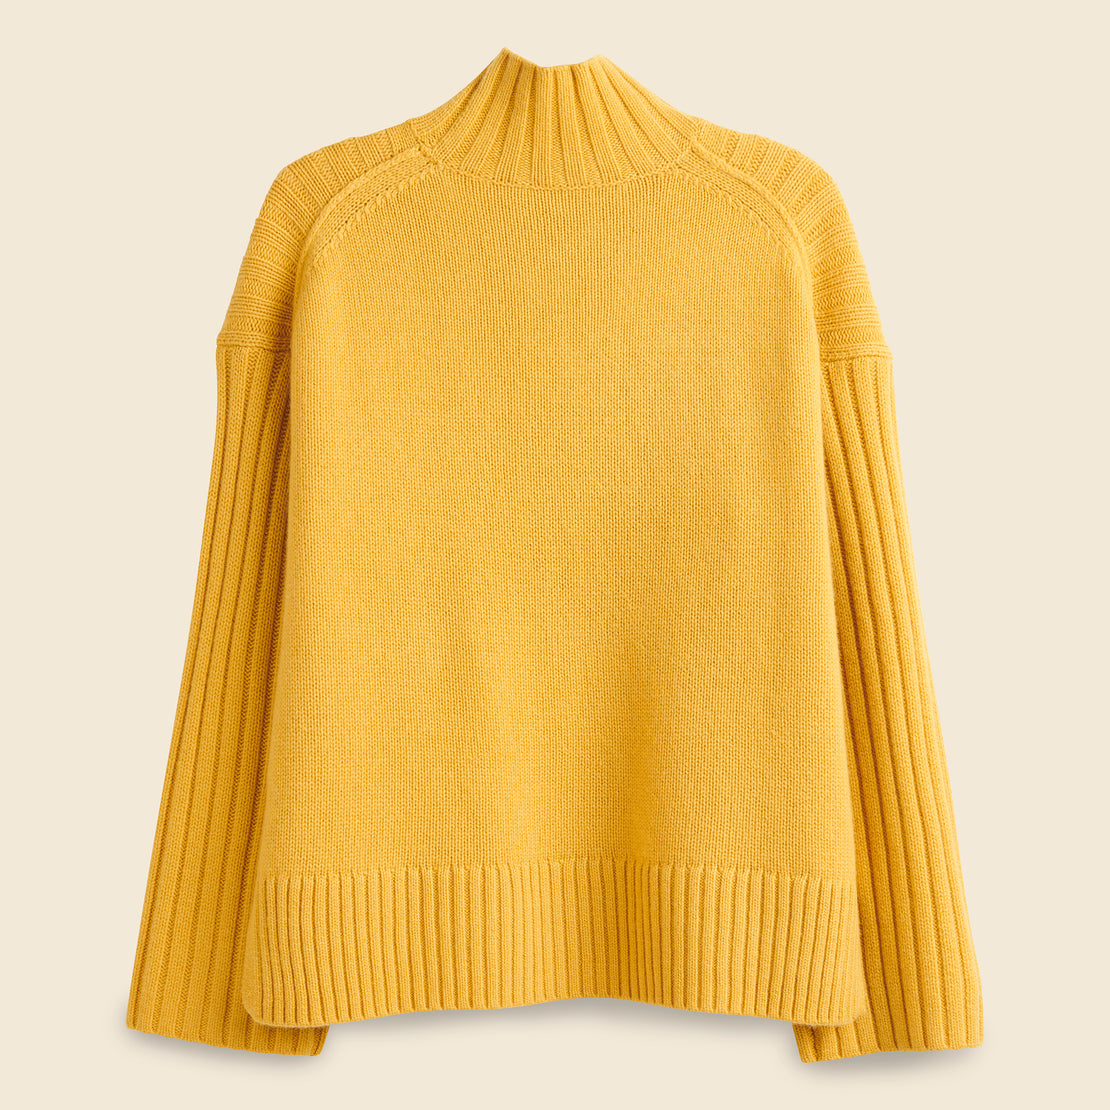 Chaley Rib Mock Neck Sweater - Gold - Alex Mill - STAG Provisions - W - Tops - Sweater